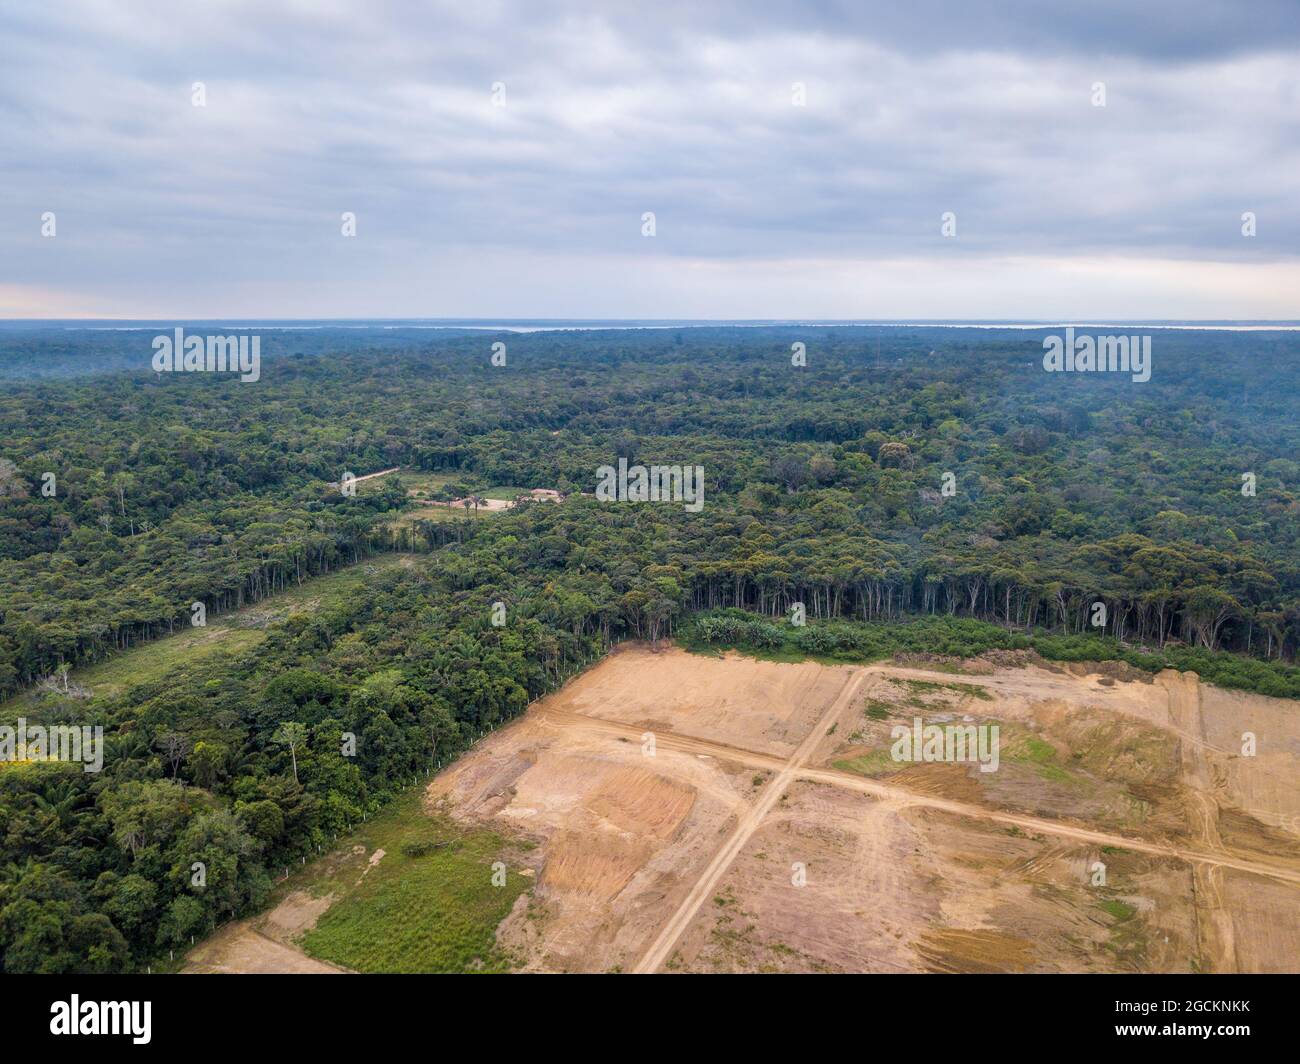 Aerial view of deforestation of Amazon rainforest. Forest trees destroyed to open land for commercial area. Concept of environment, ecology, climate. Stock Photo